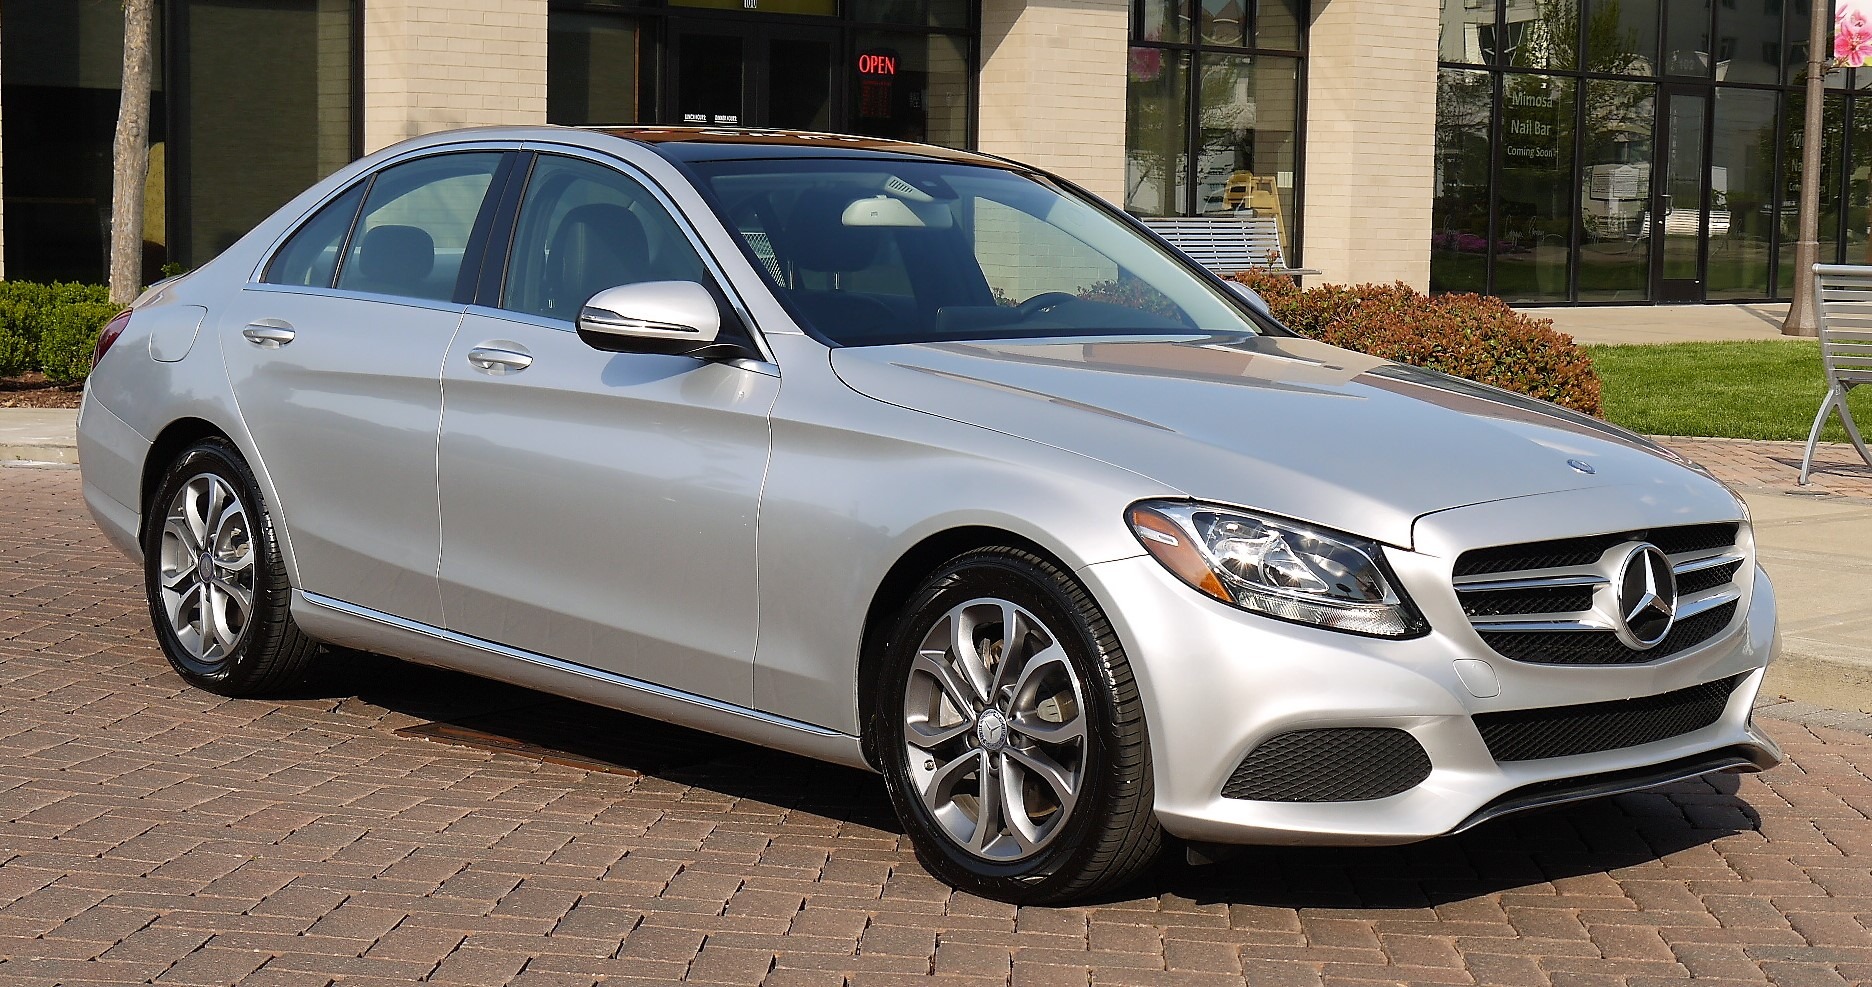 Used 2016 Mercedes Benz C Class C 300 for sale at HGreg